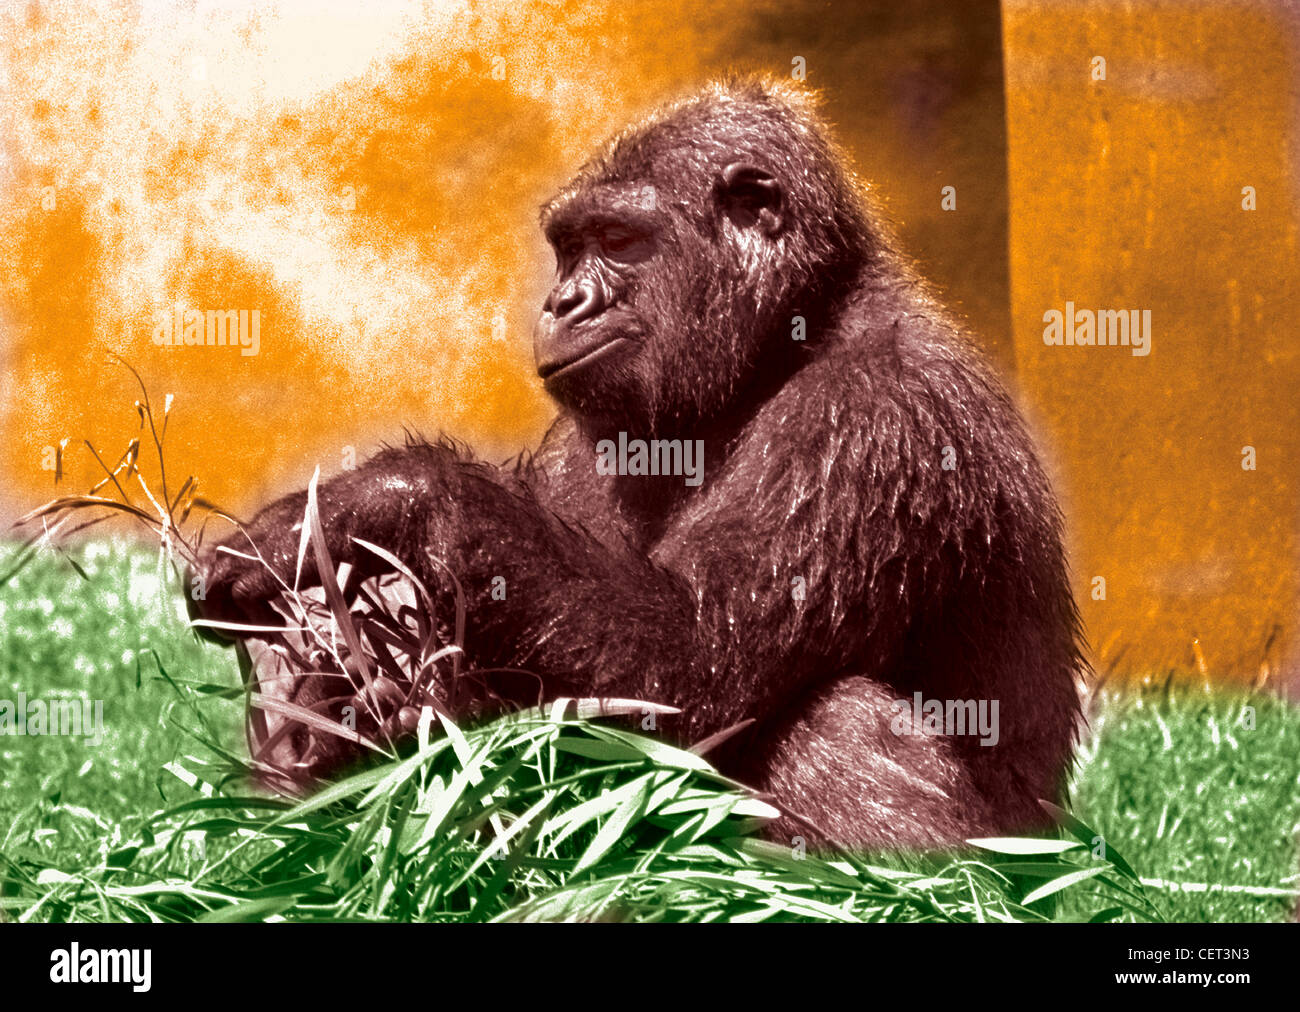 Profile of Gorilla in grass with wall behind.  Hand colored horizontal photograph.  Good facial expression. Humorous Stock Photo